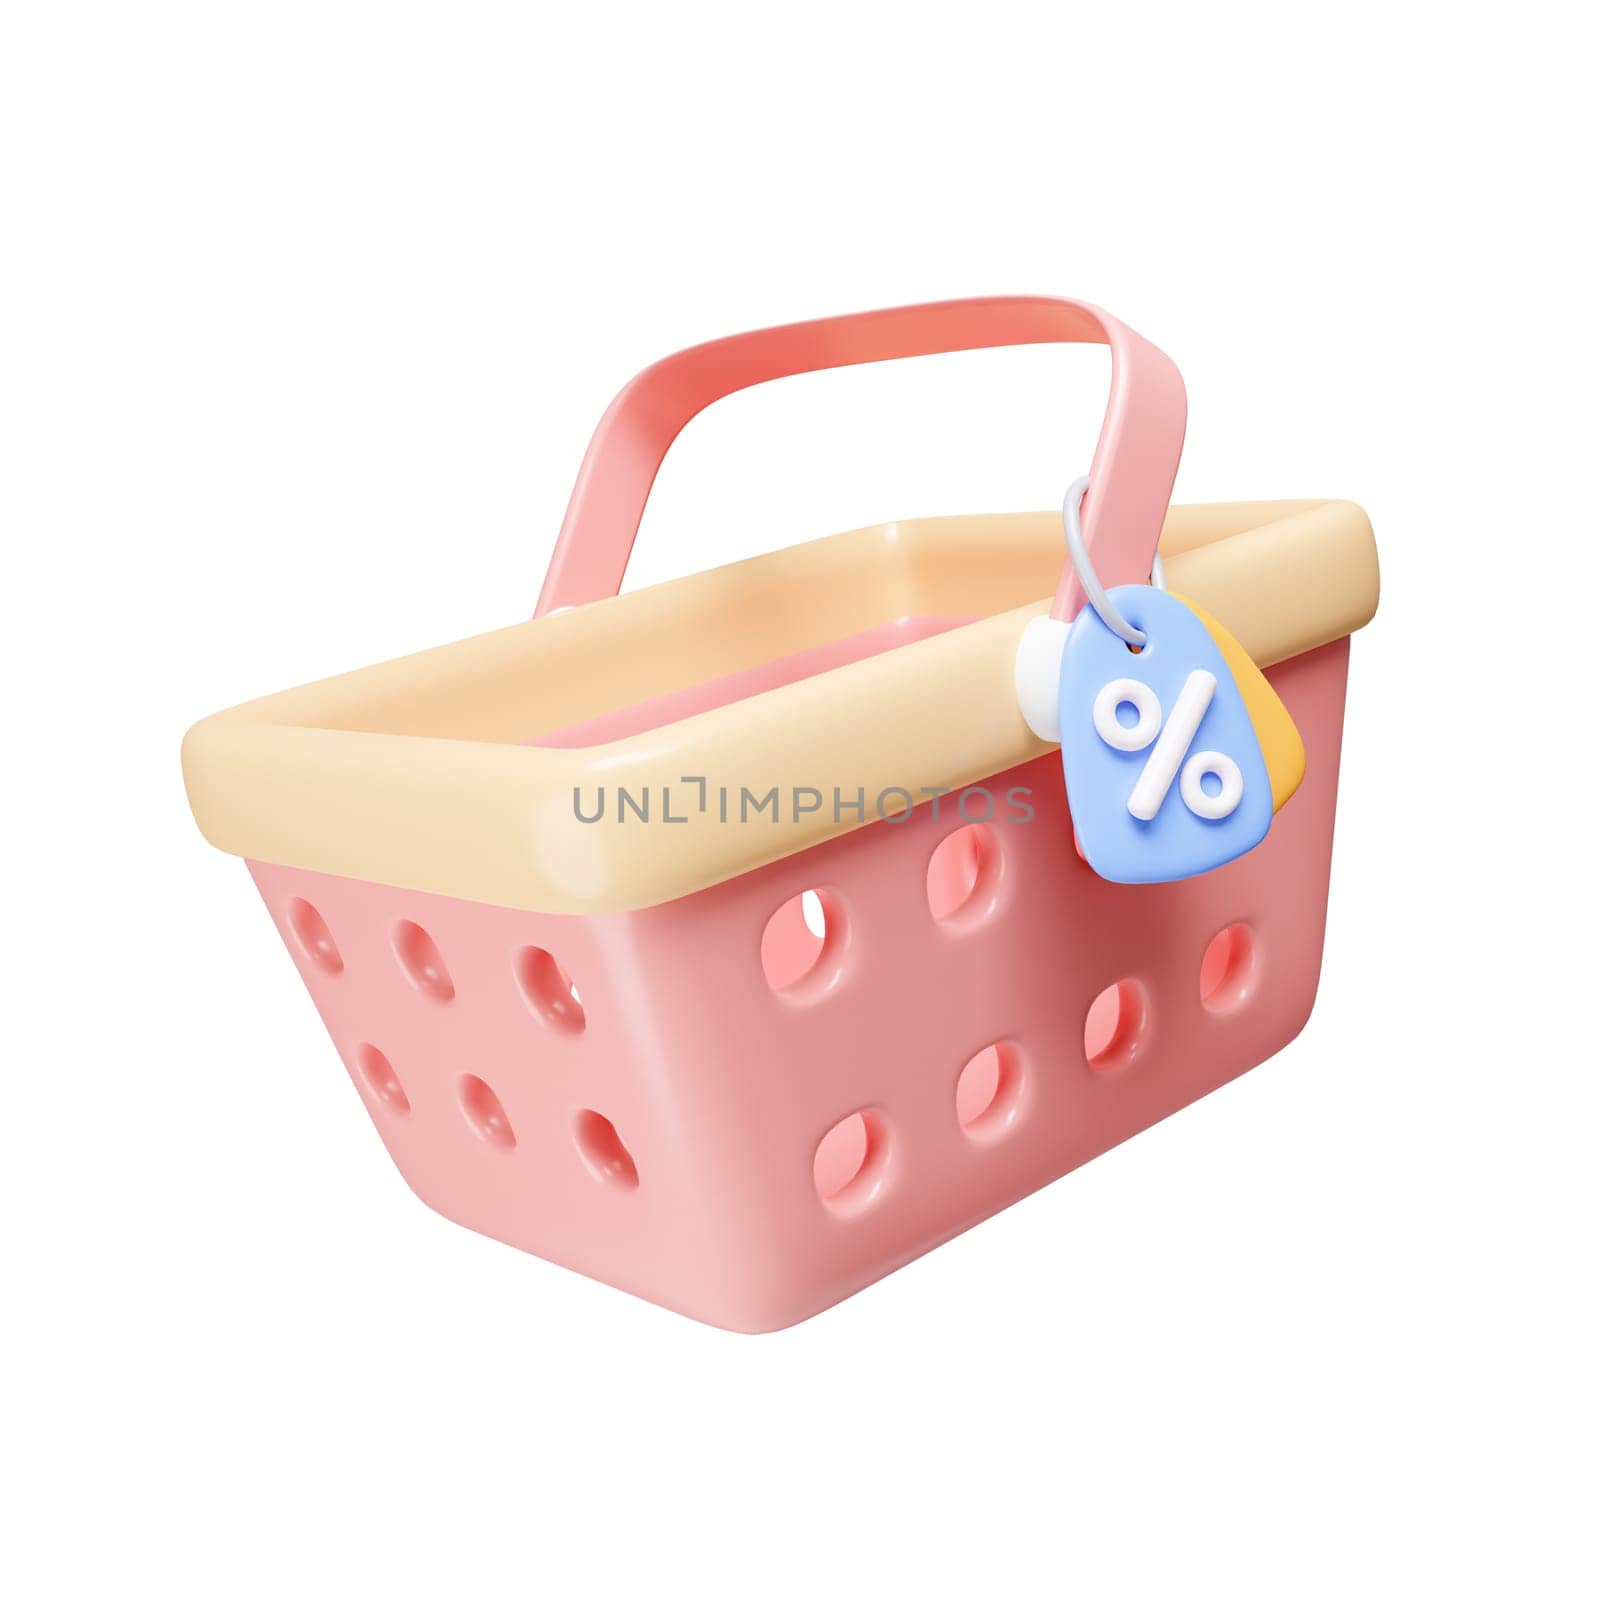 3d basket shopping with price tags for online shopping and supermarket. discount coupon of cash, special offer promotion. icon isolated on white background. 3d rendering illustration. Clipping path..